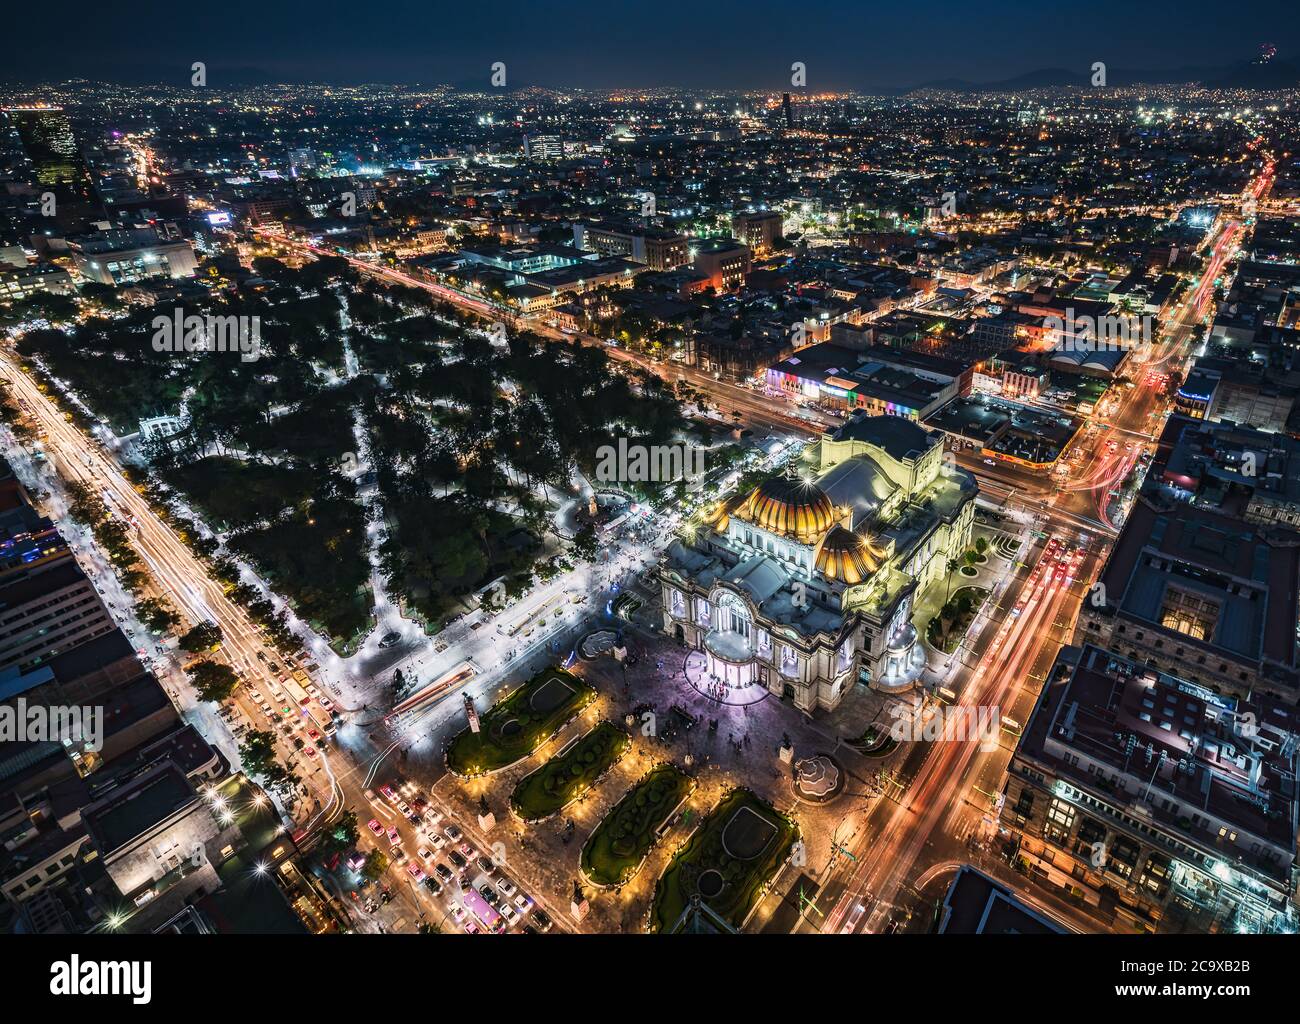 Lights over Mexico City at night Stock Photo